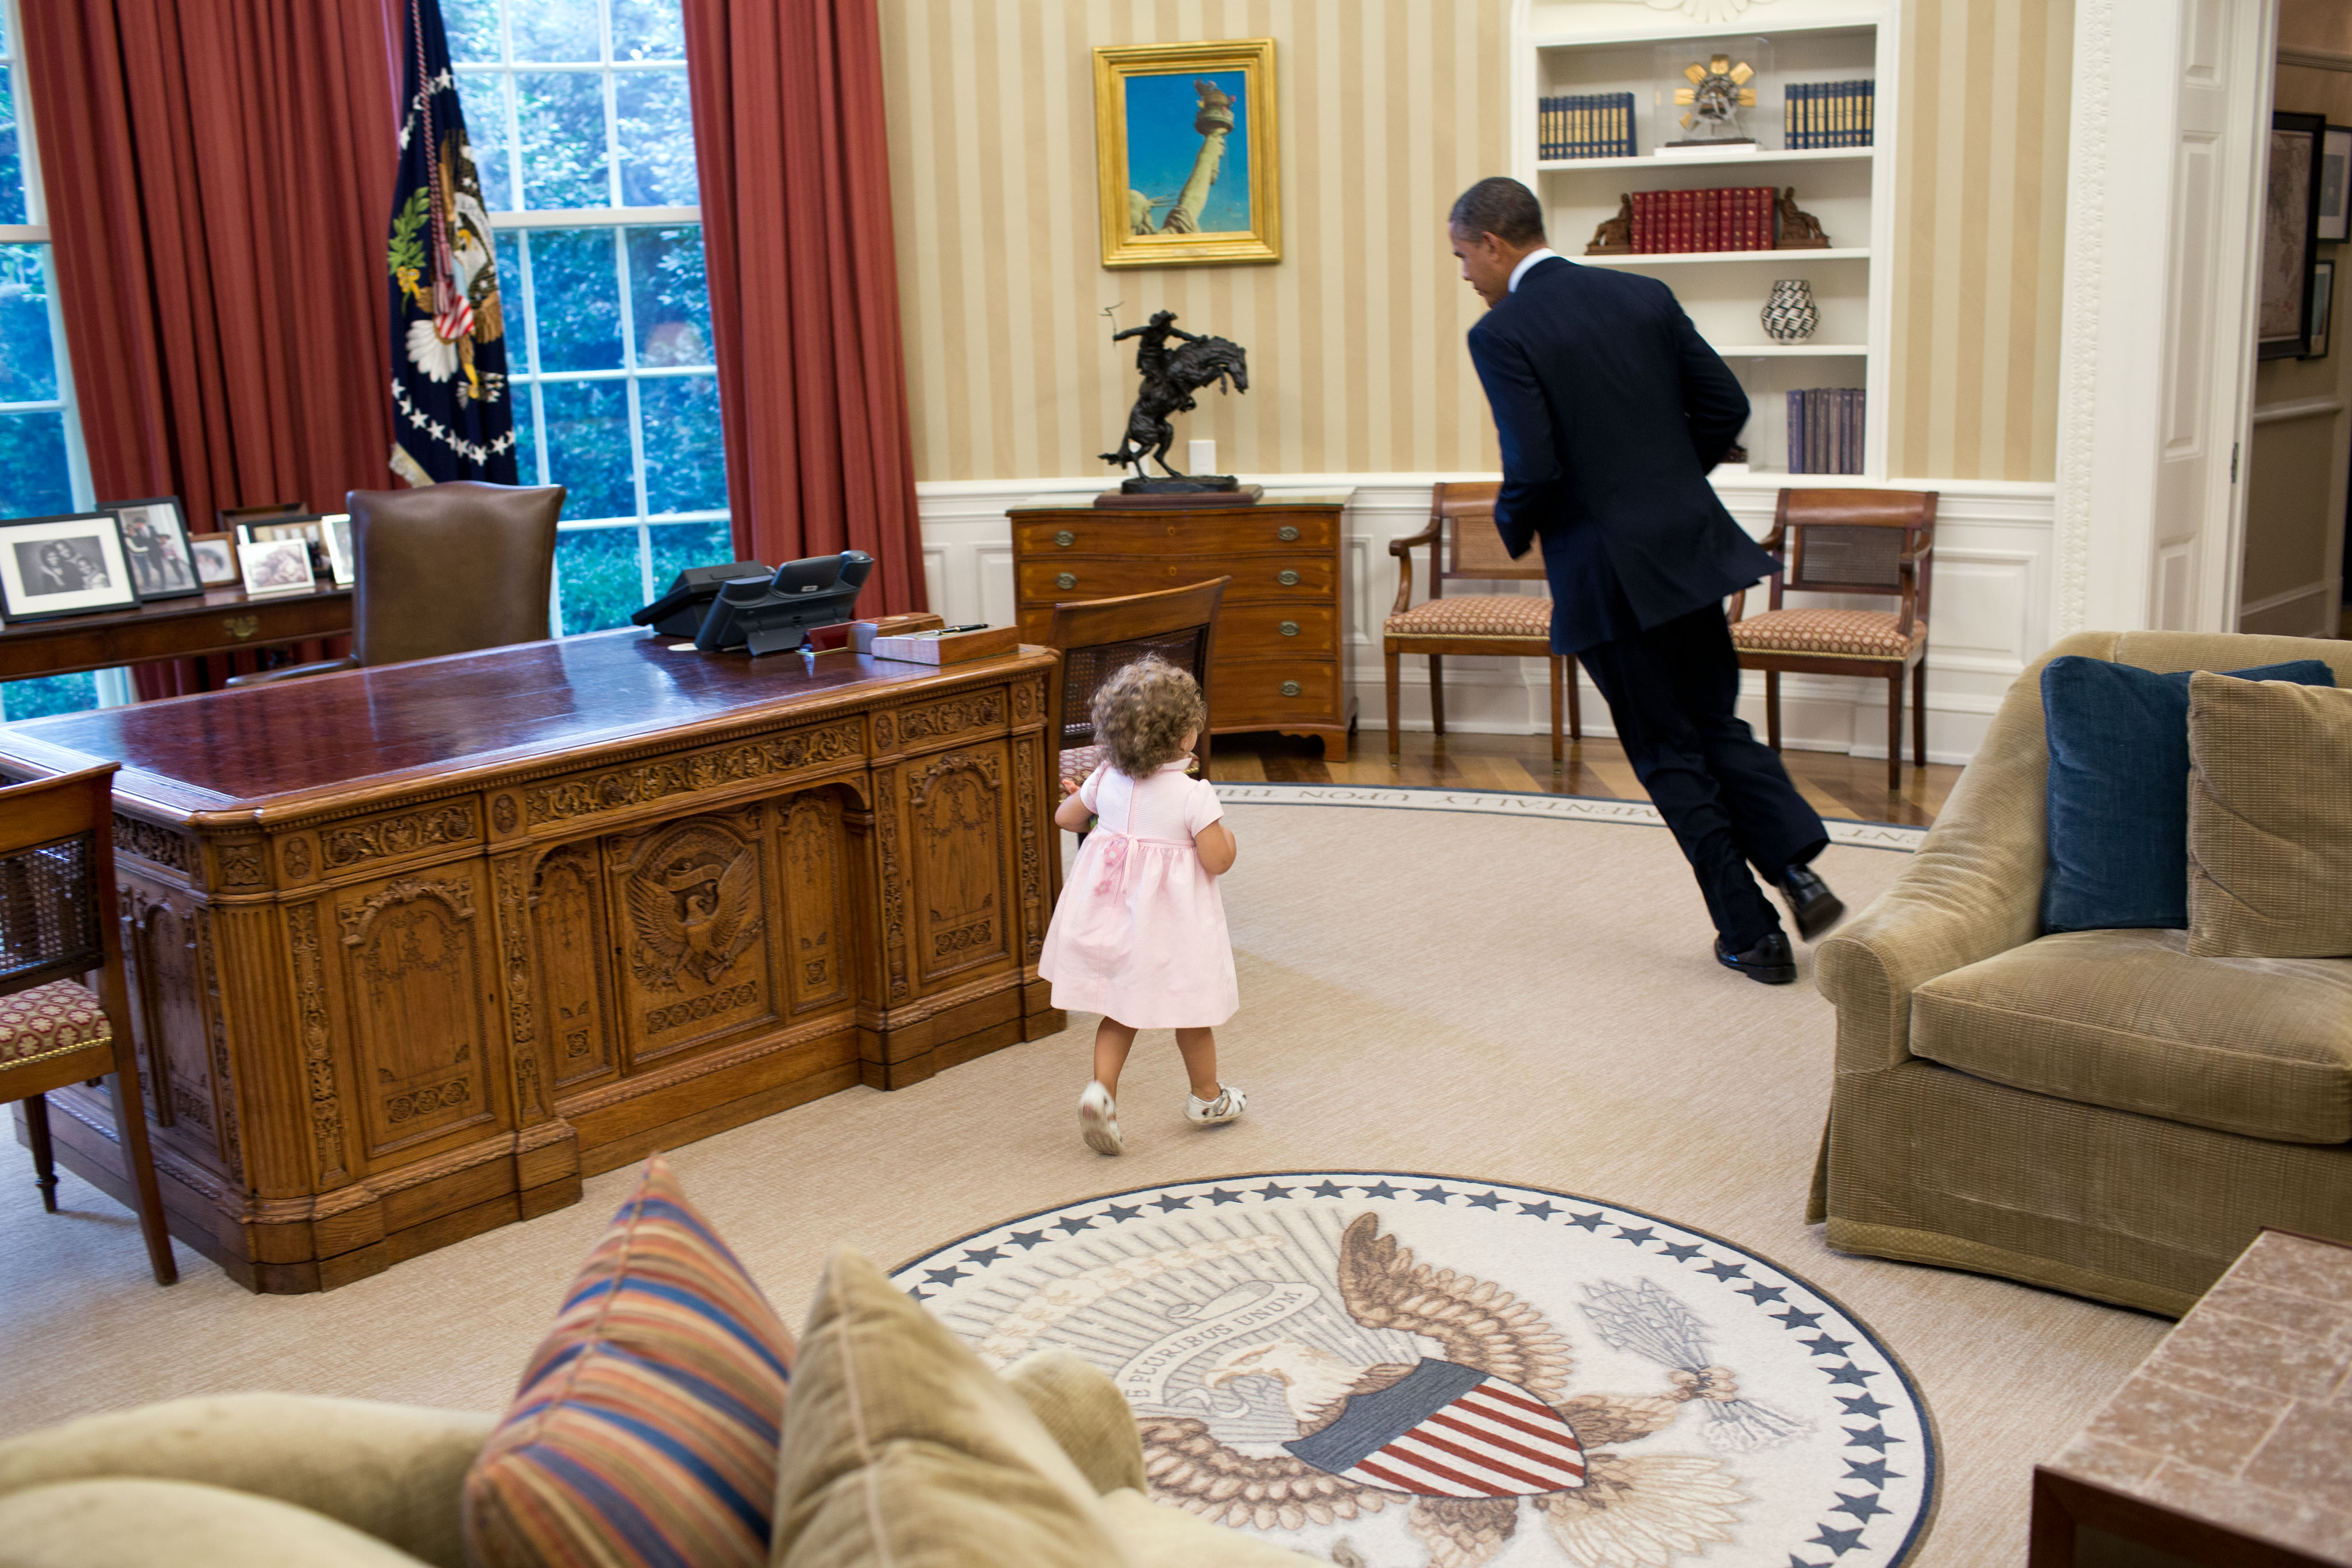 File:Barack Obama running in the Oval  - Wikimedia Commons